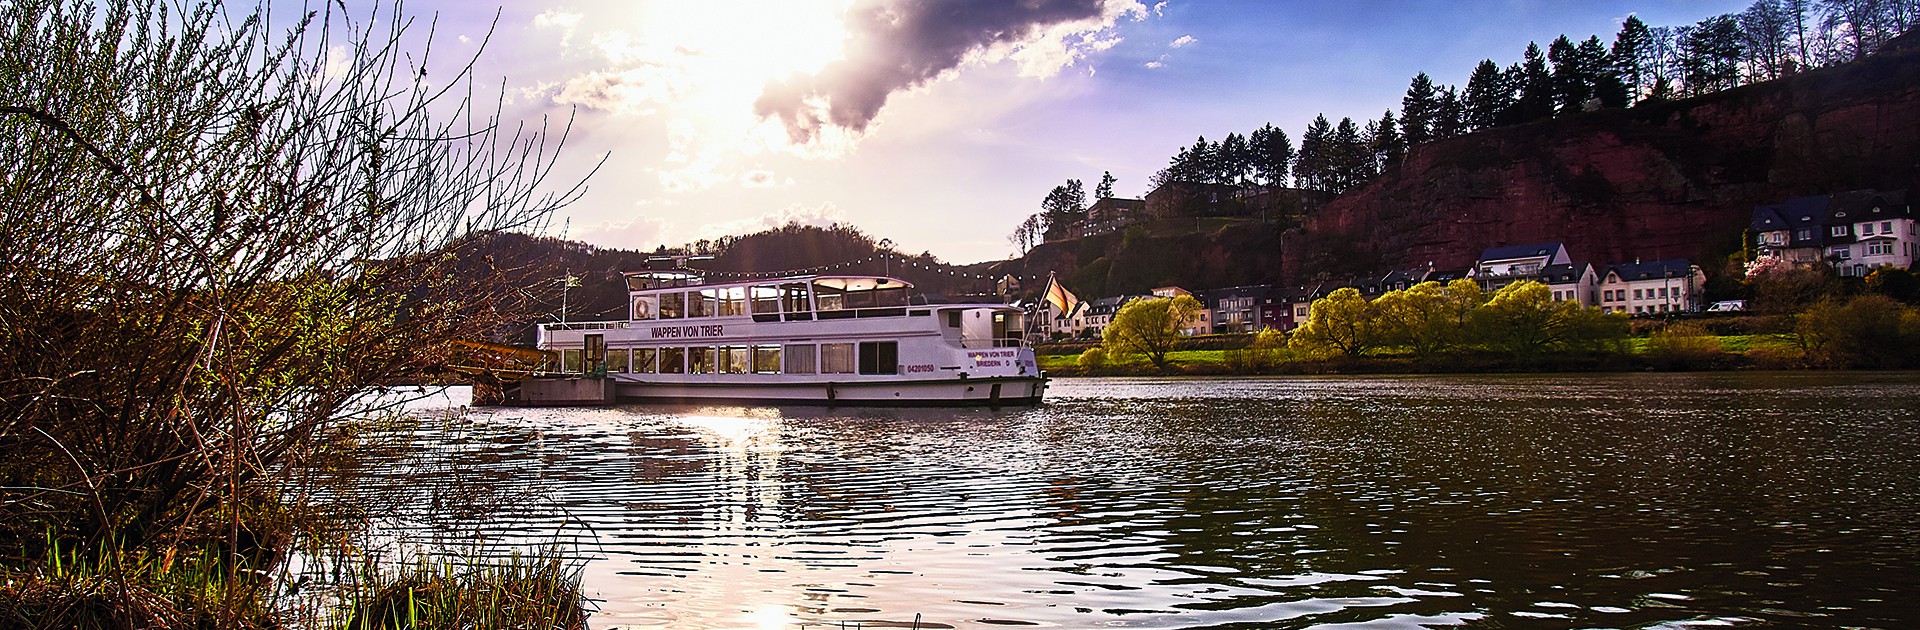 Ship at the Moselle Riverside - © Marcel Fuchs